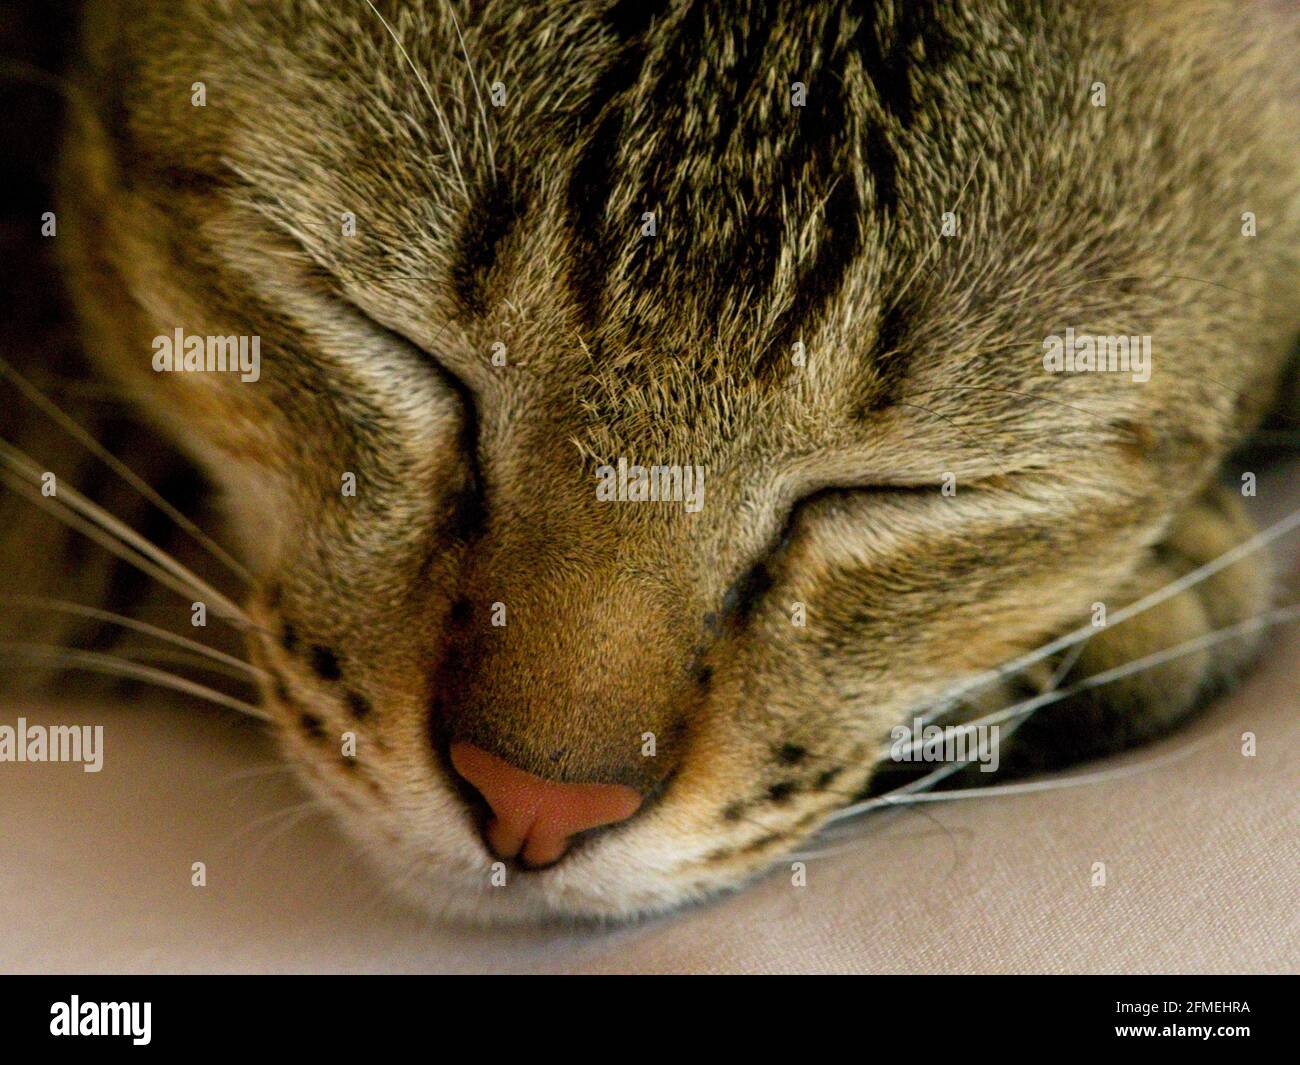 Closeup portrait of sleeping cute cat with whiskers Bali, Indonesia. Stock Photo